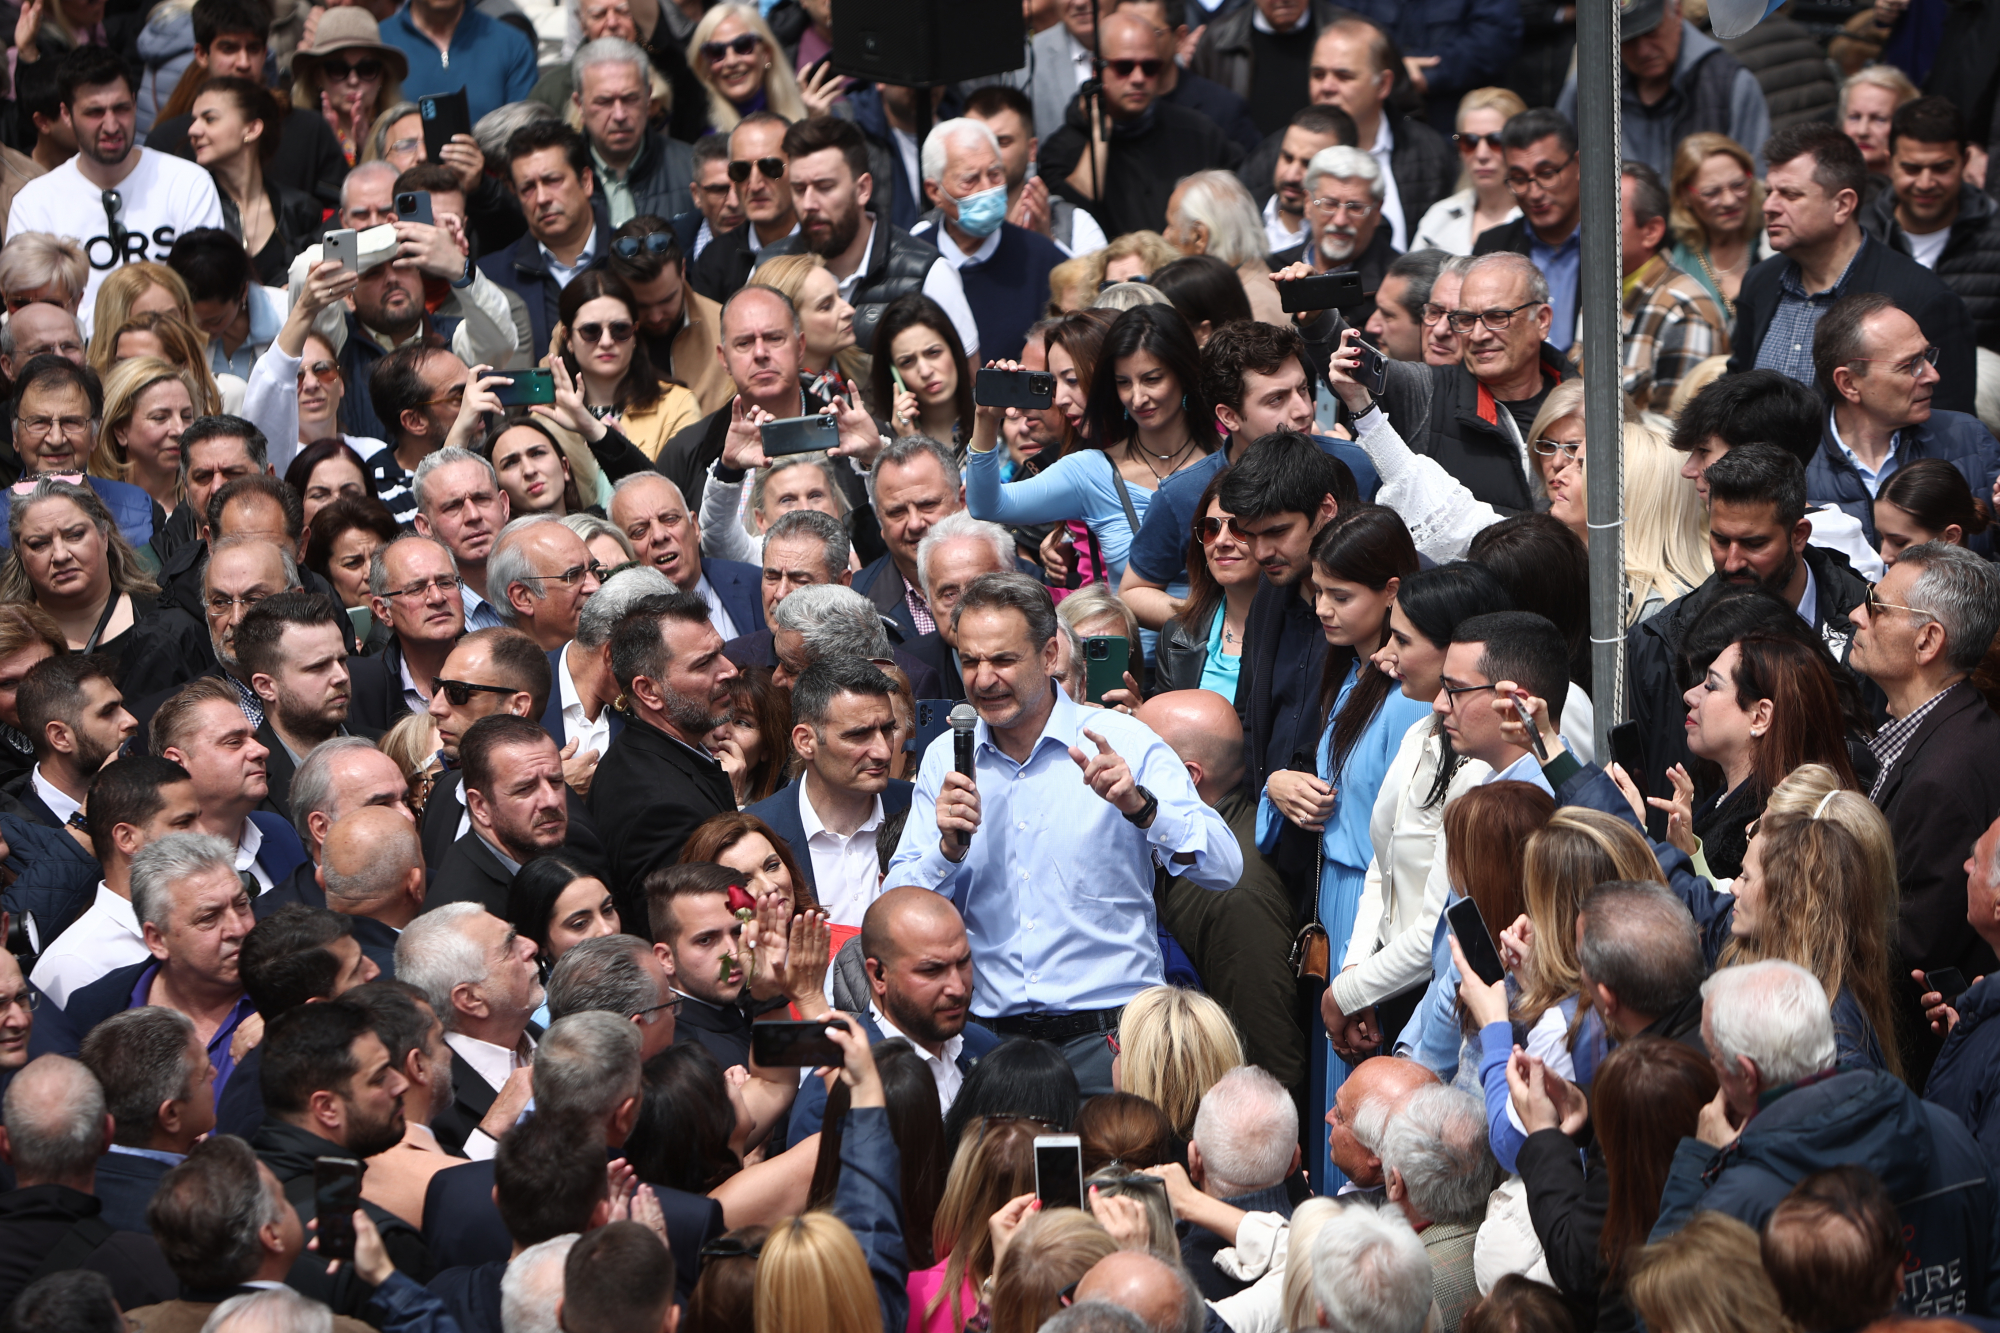 Greek elections: Campaign with town hall meetings and social media – What Mitsotakis changes and what he’s keeping from the 2019 pre-election model